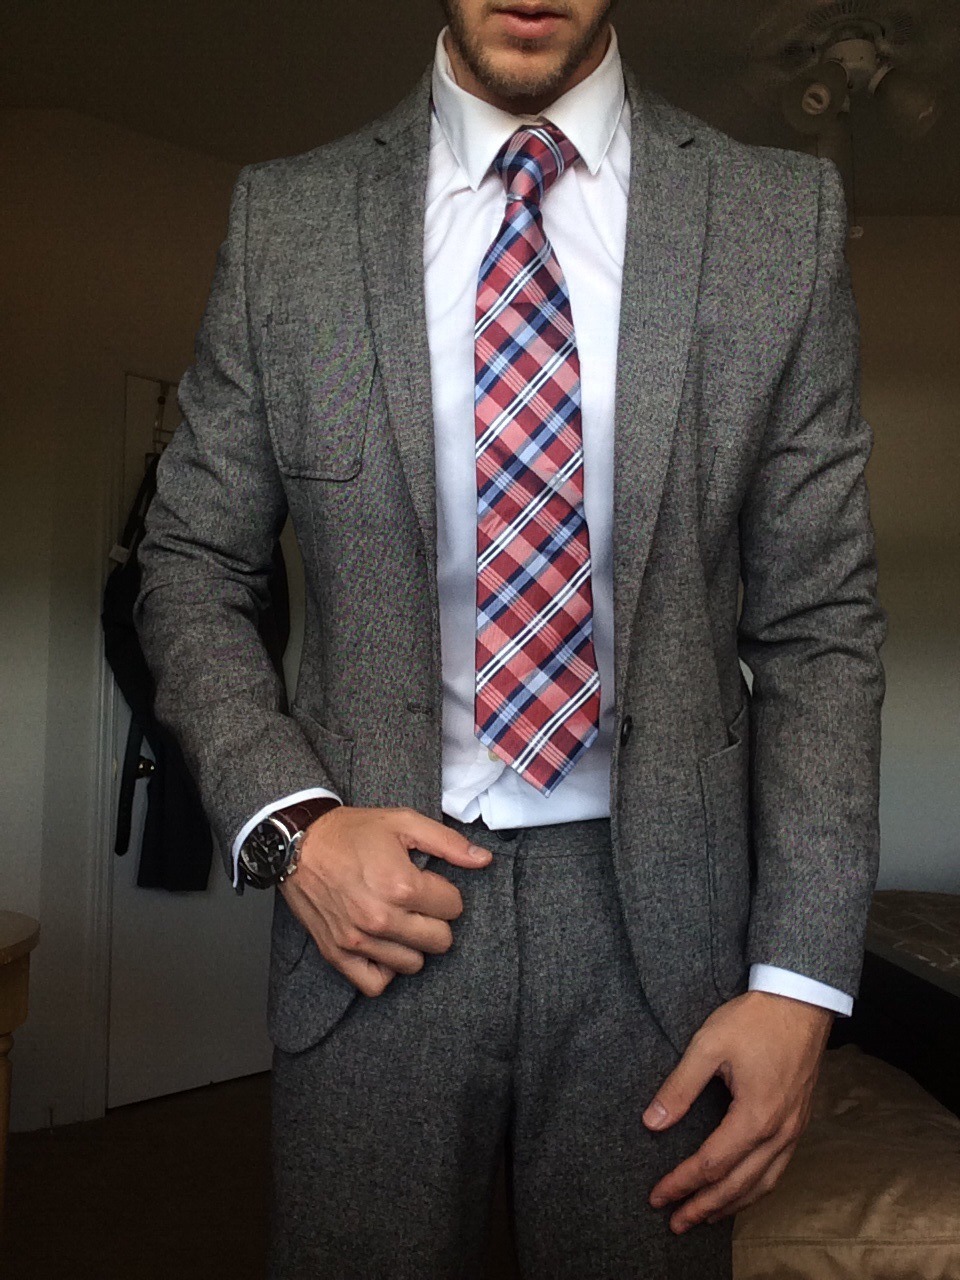 i-want-spankings:rhapsodybrohemian:  The suit does all the talking.  Oh god